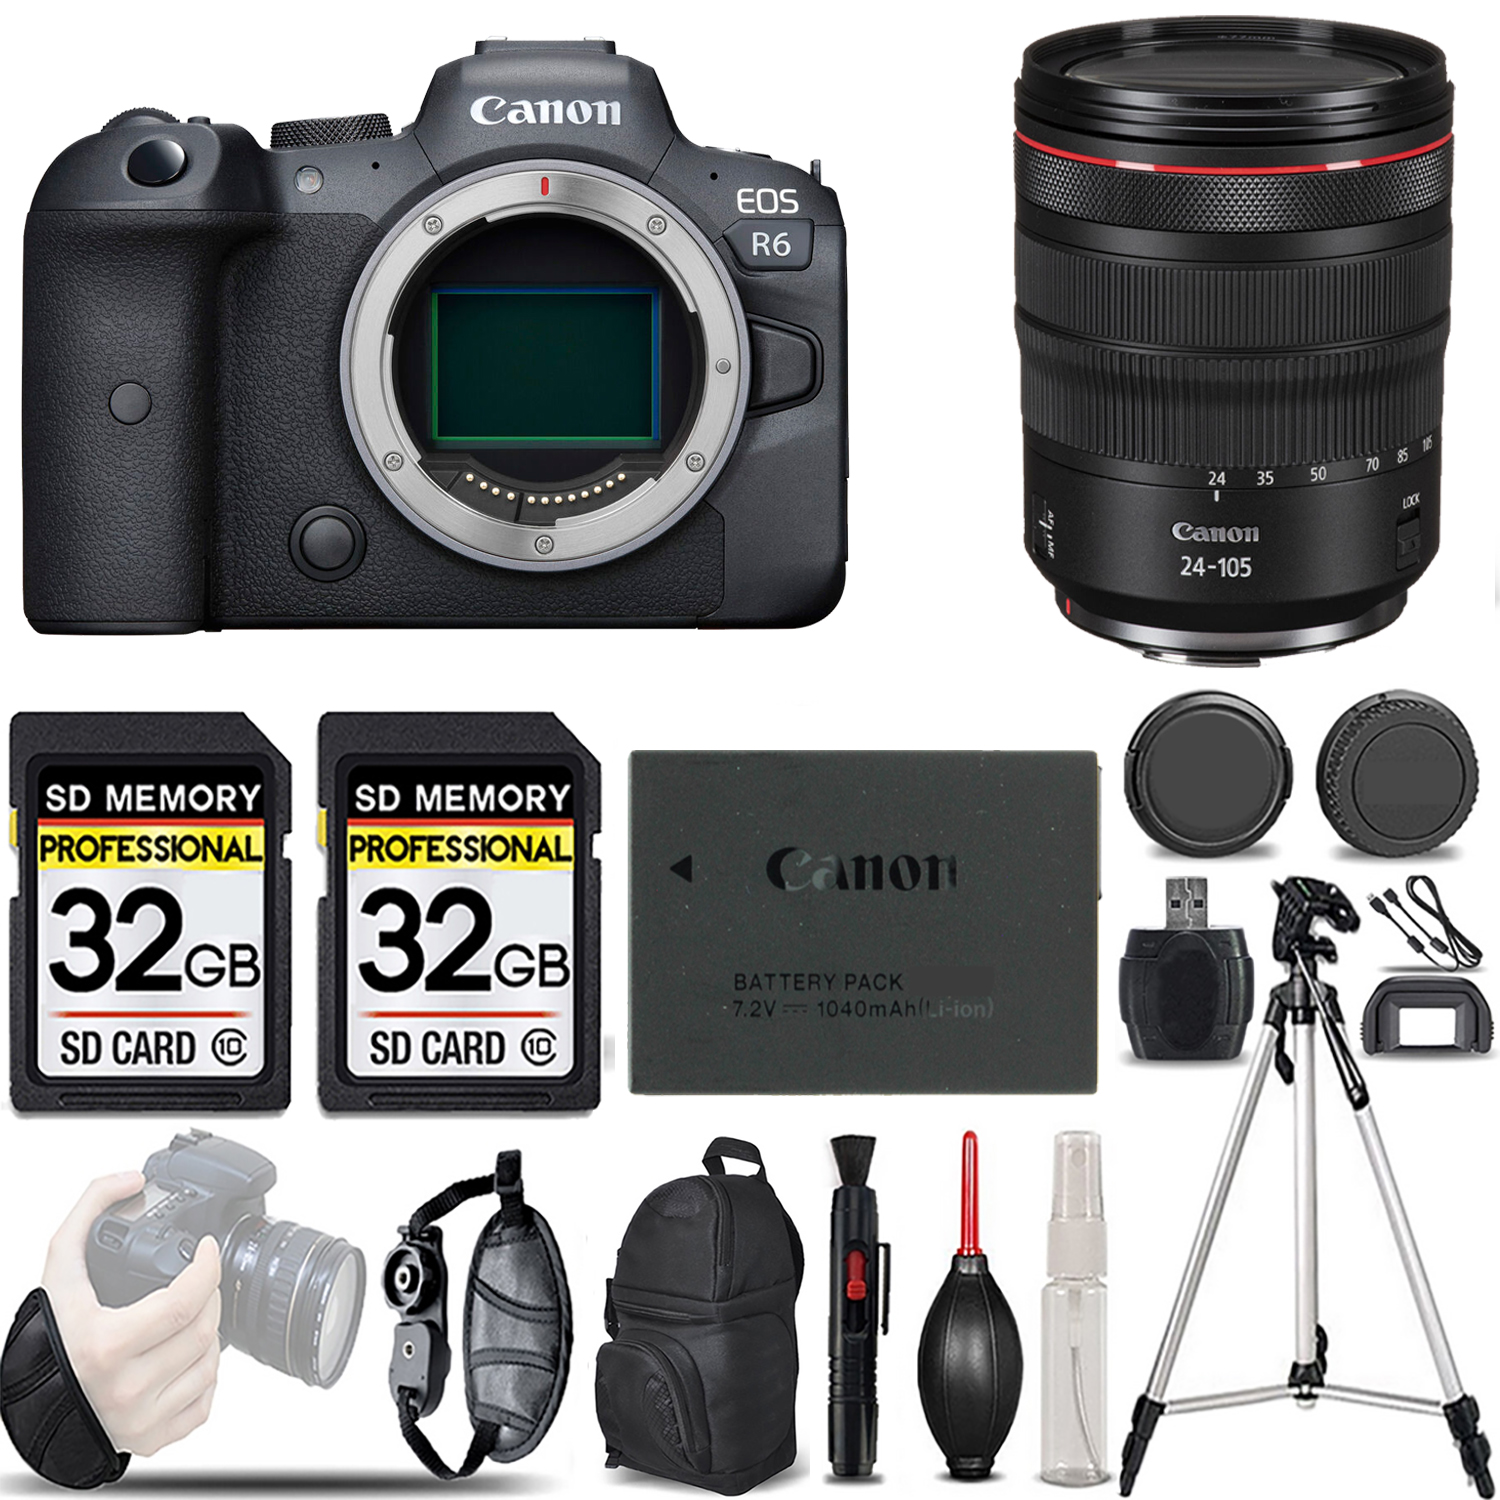 EOS R6 Mirrorless Camera + 24-105mm f/4 L IS USM Lens - LOADED KIT *FREE SHIPPING*